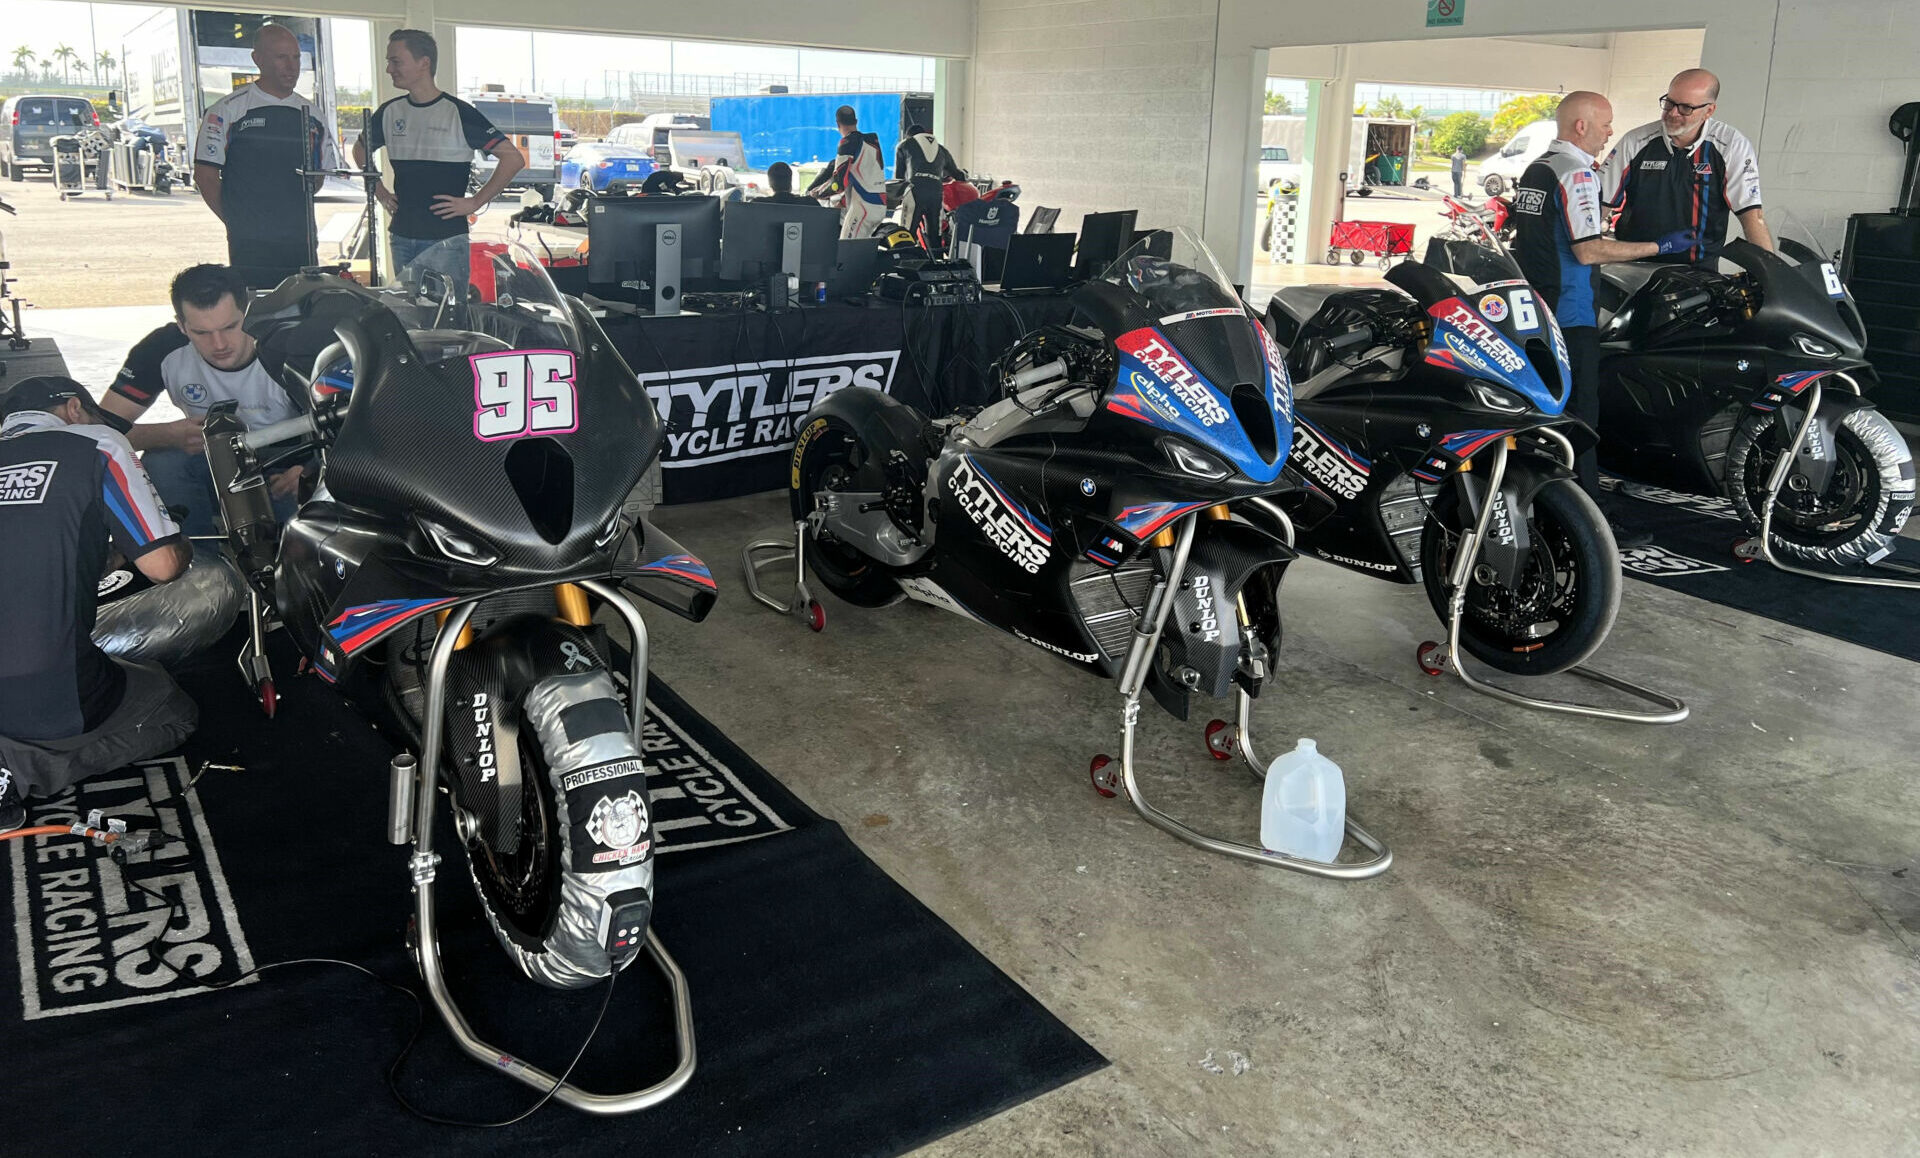 The Tytlers Cycle Racing MotoAmerica Superbike team and its BMW M 1000 RR Superbikes set up in a garage at Homestead-Miami Speedway. Team Manager/Crew Chief Dave Weaver can be seen at the far right. Photo by Steve Guanche.